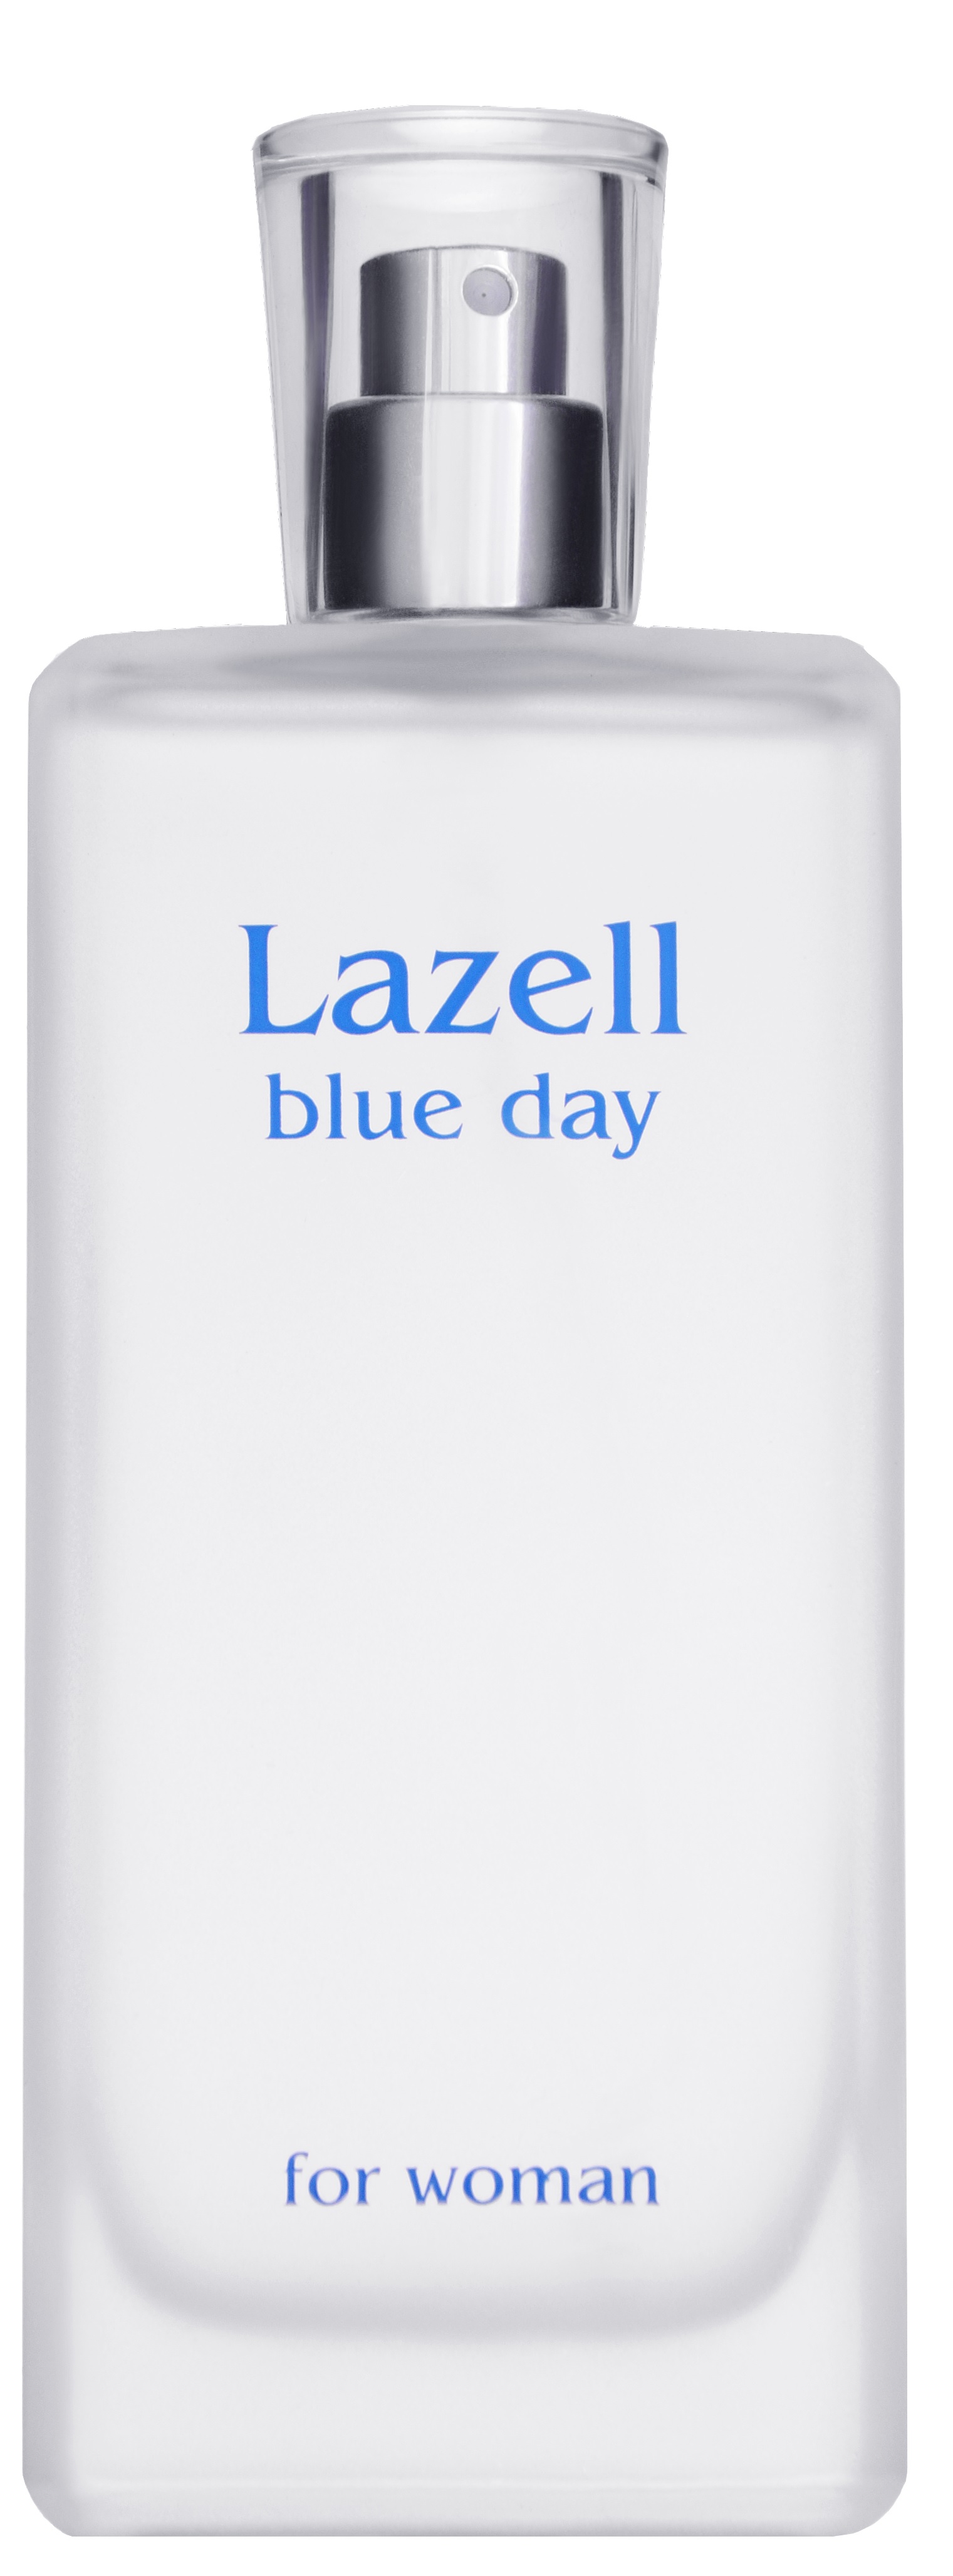 725-lazell-blue-day-for-women